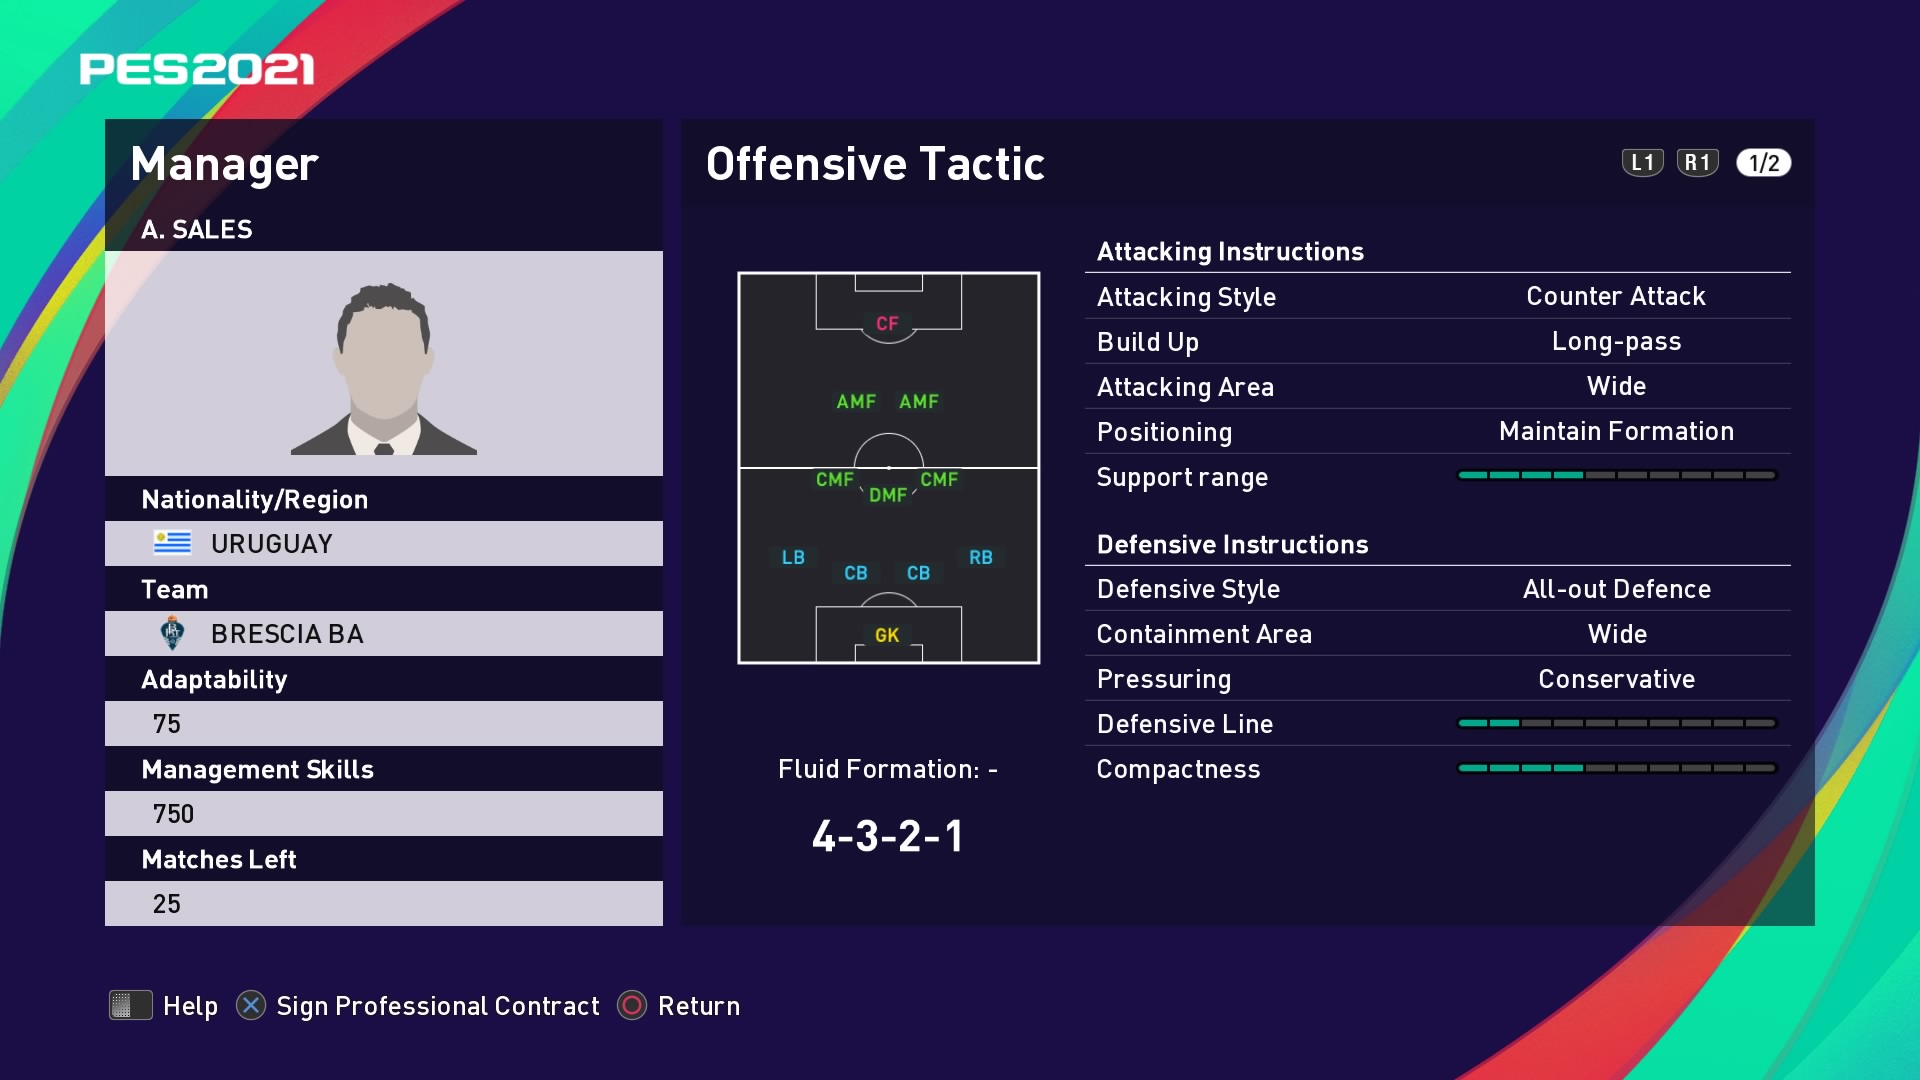 A. Sales (Diego López) Offensive Tactic in PES 2021 myClub